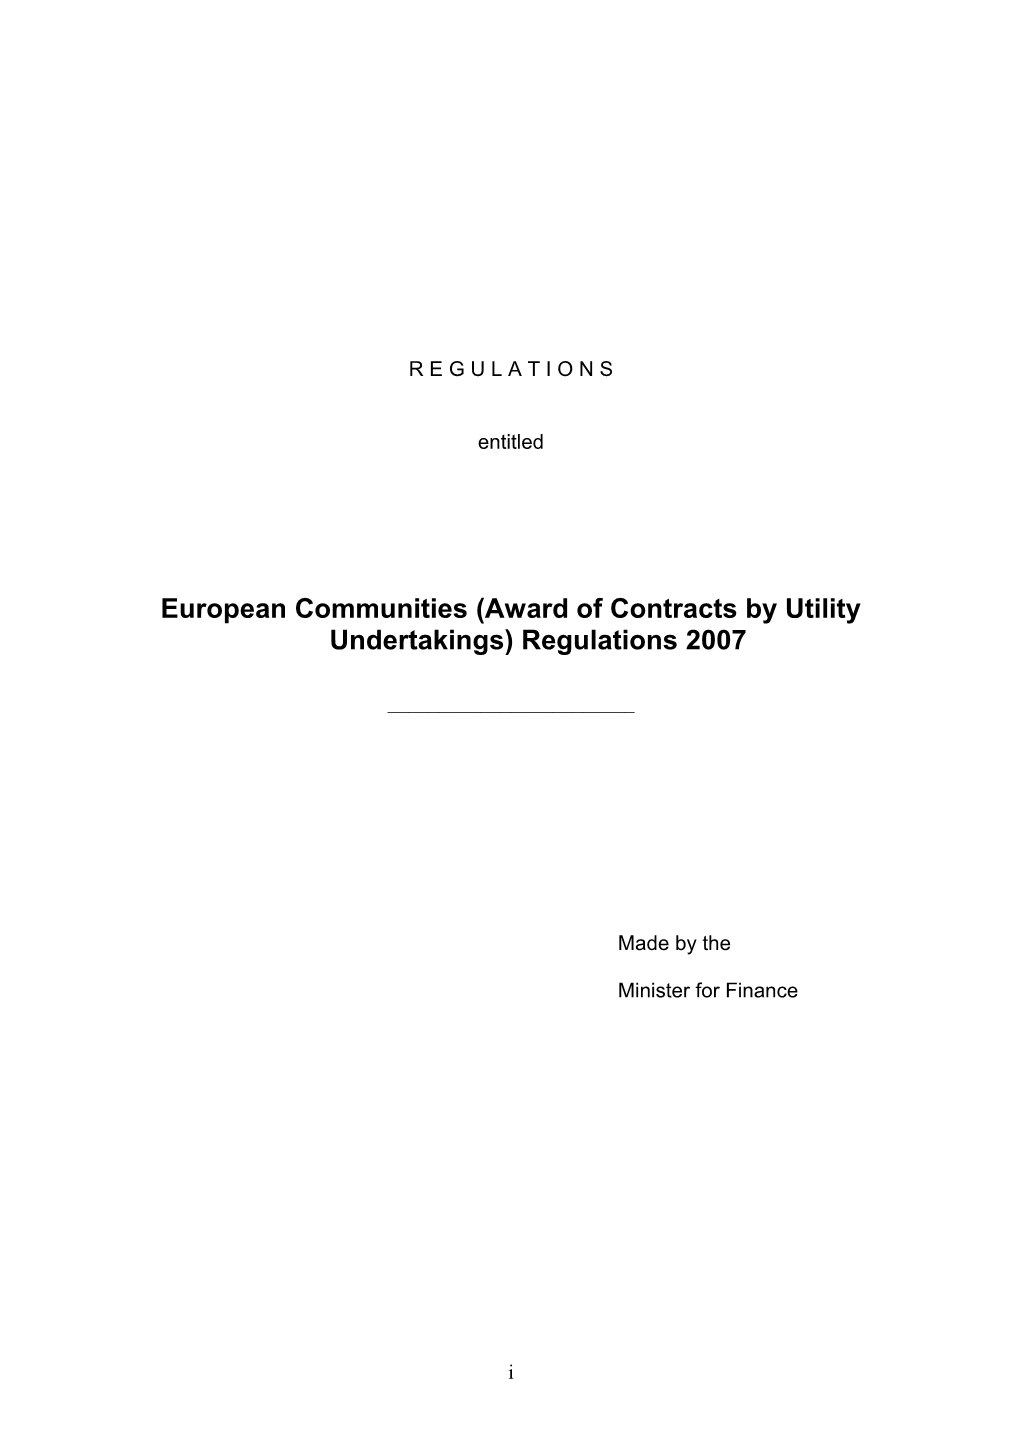 European Communities (Award of Contracts by Utility Undertakings)Regulations 2007